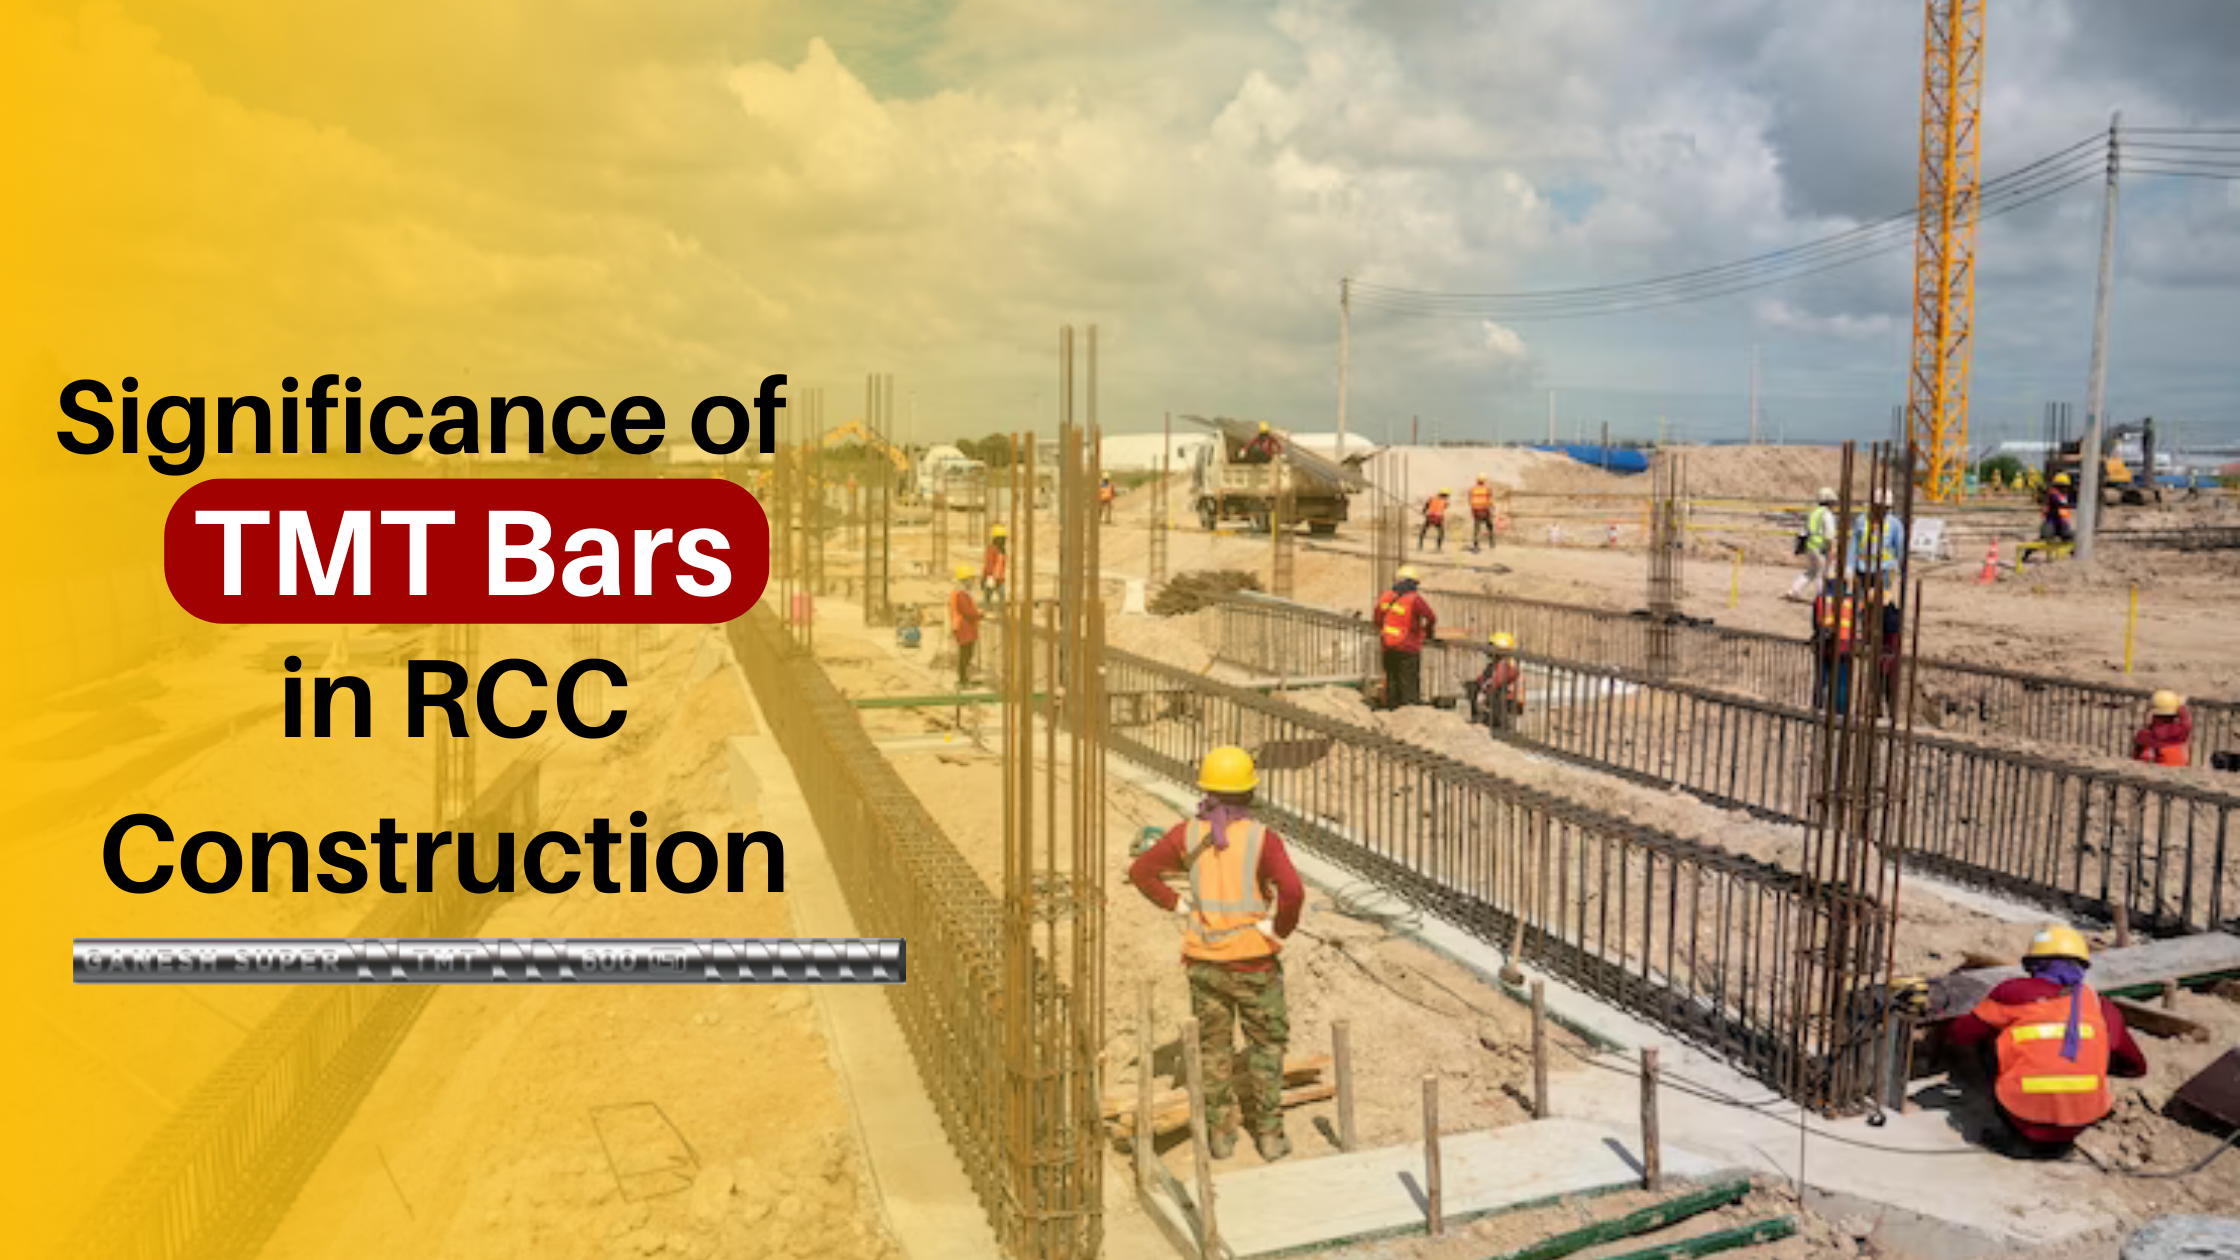 Significance of TMT Bars in RCC Construction